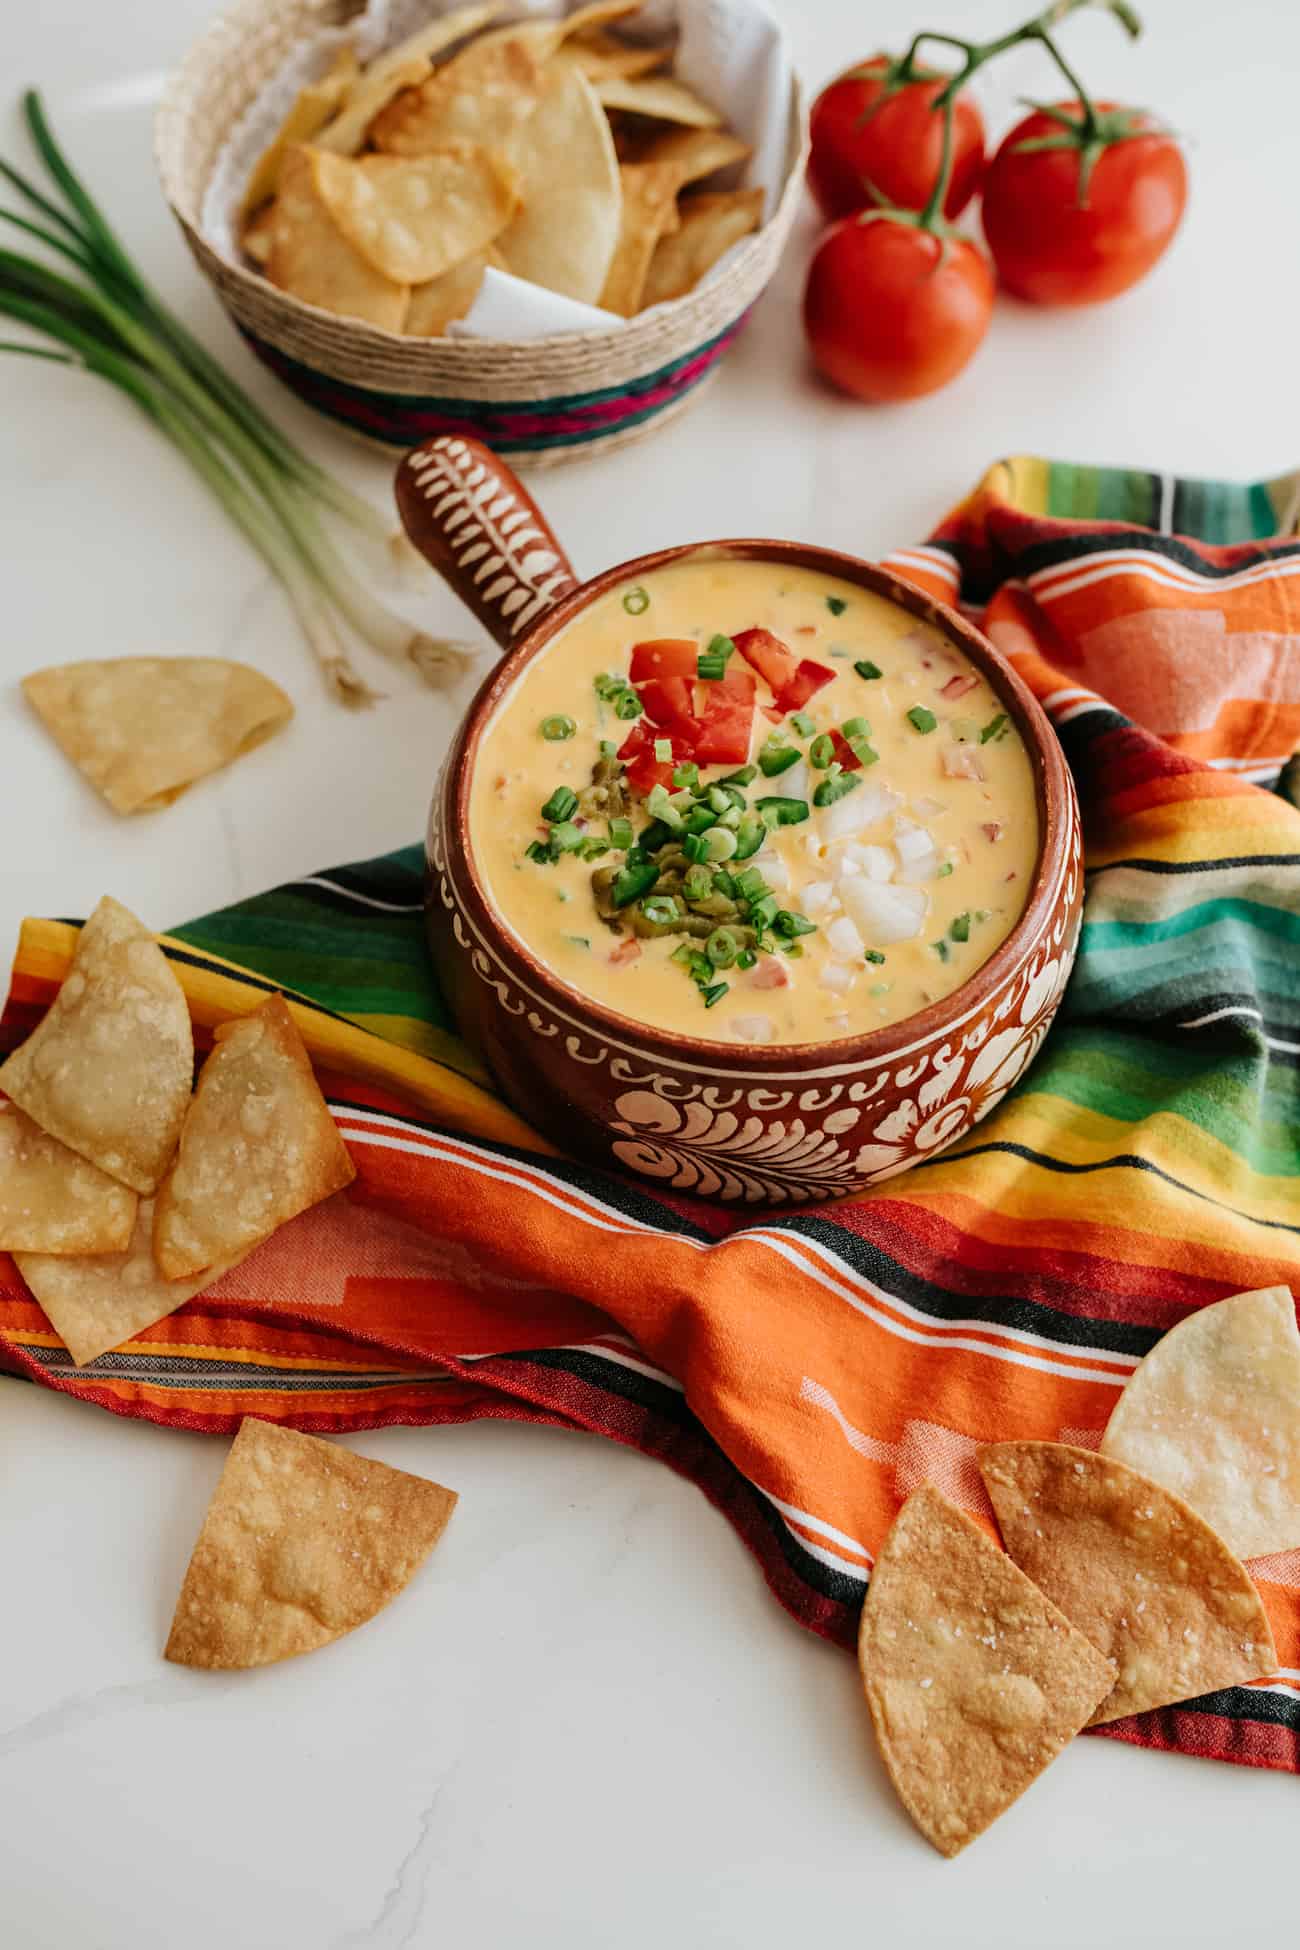 tex-mexchile con queso  in a handled bowl with a side of tortilla chips.